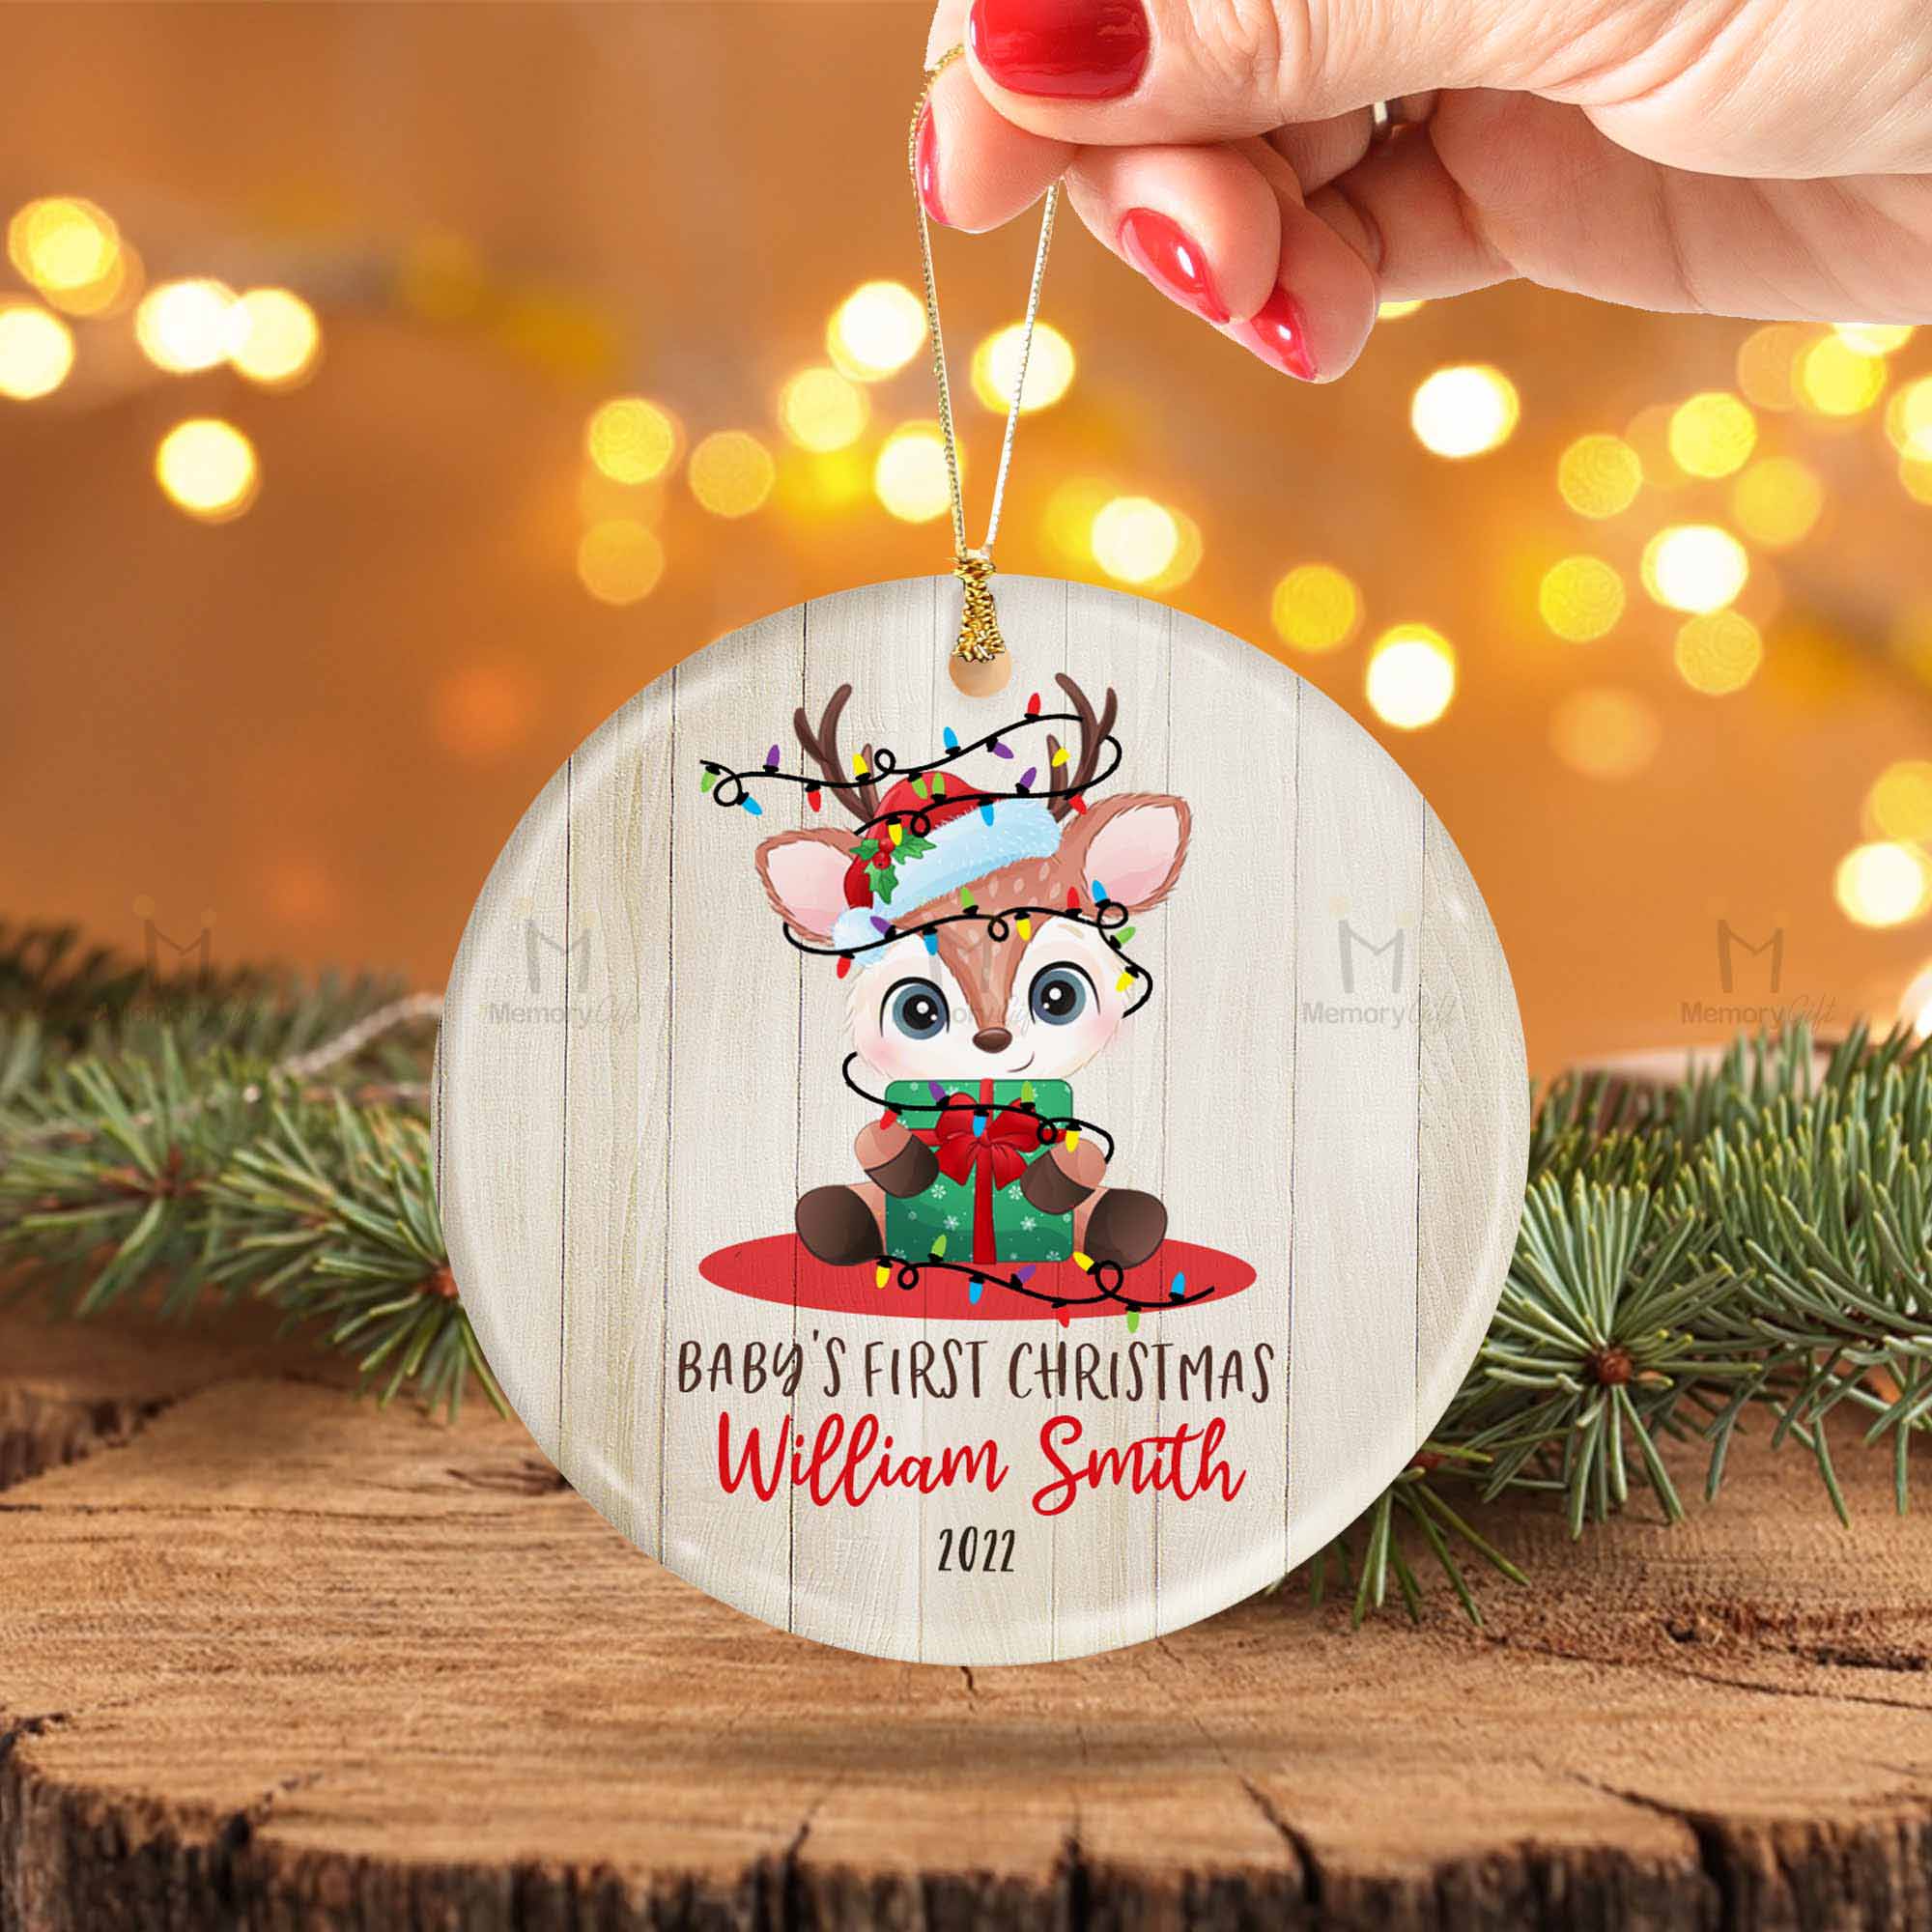 personalized baby's first christmas ornament